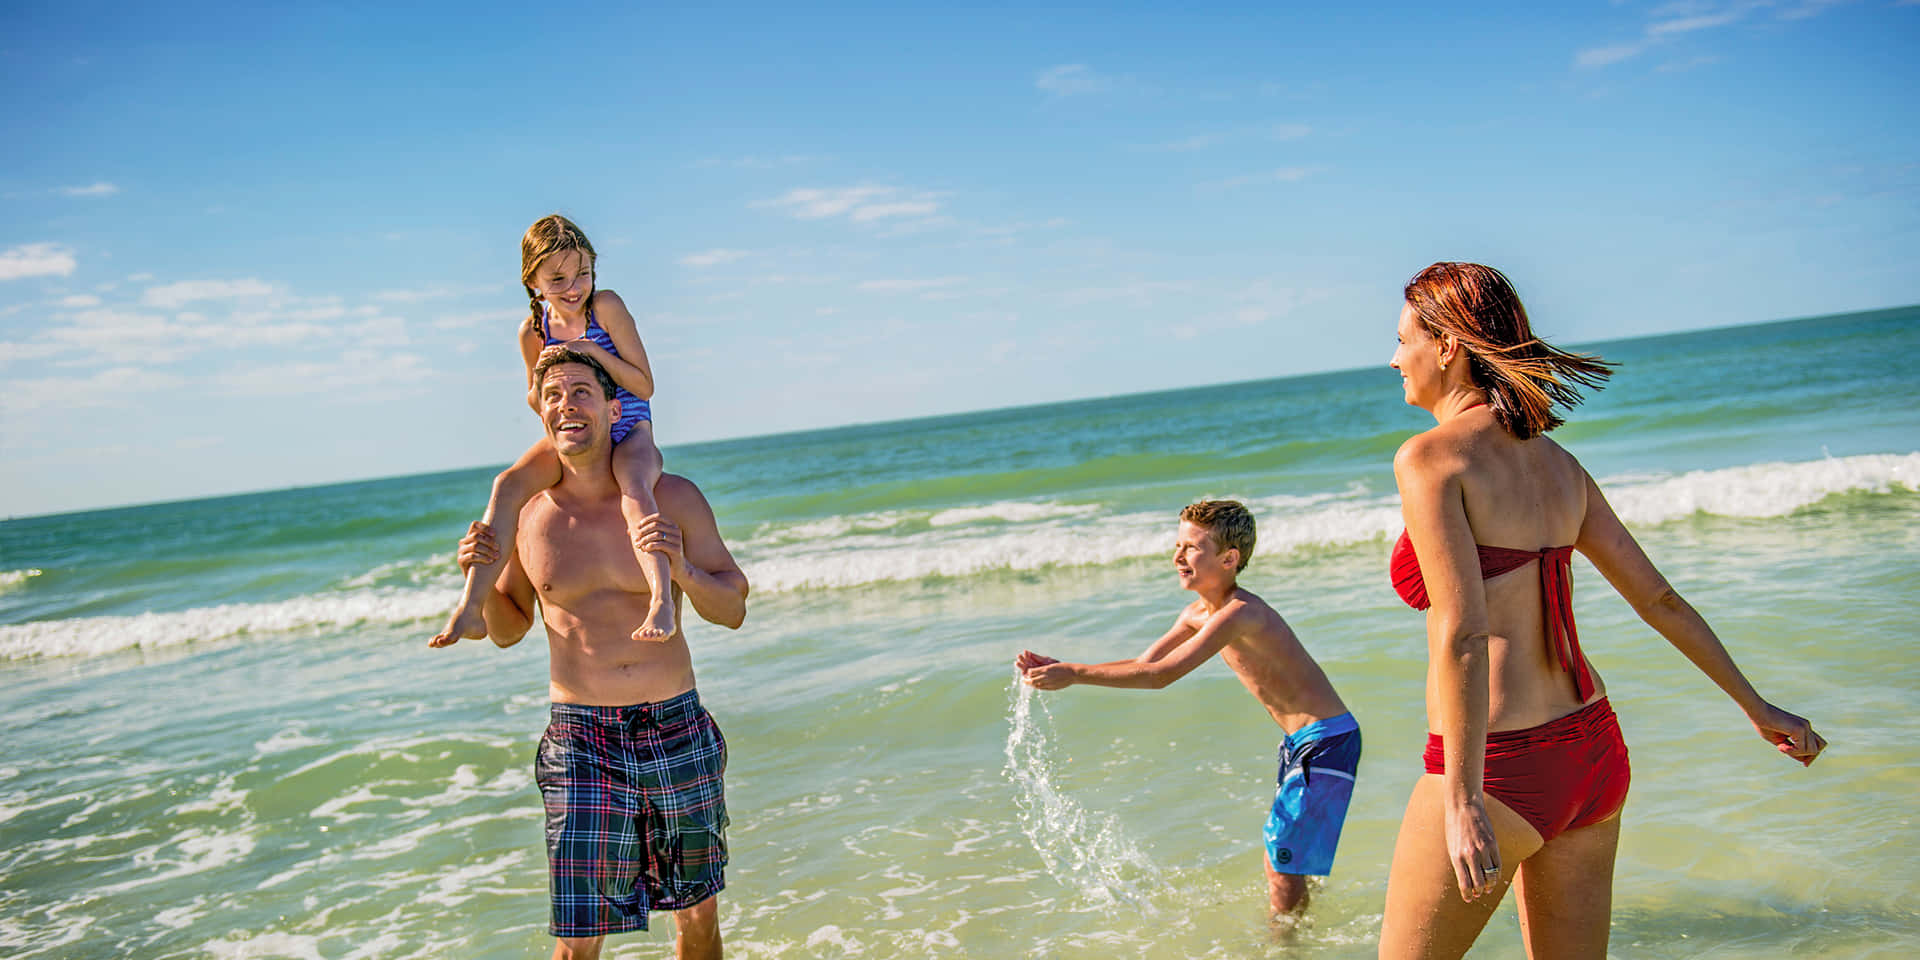 A beach day with your family is the best way to spend a summer afternoon.